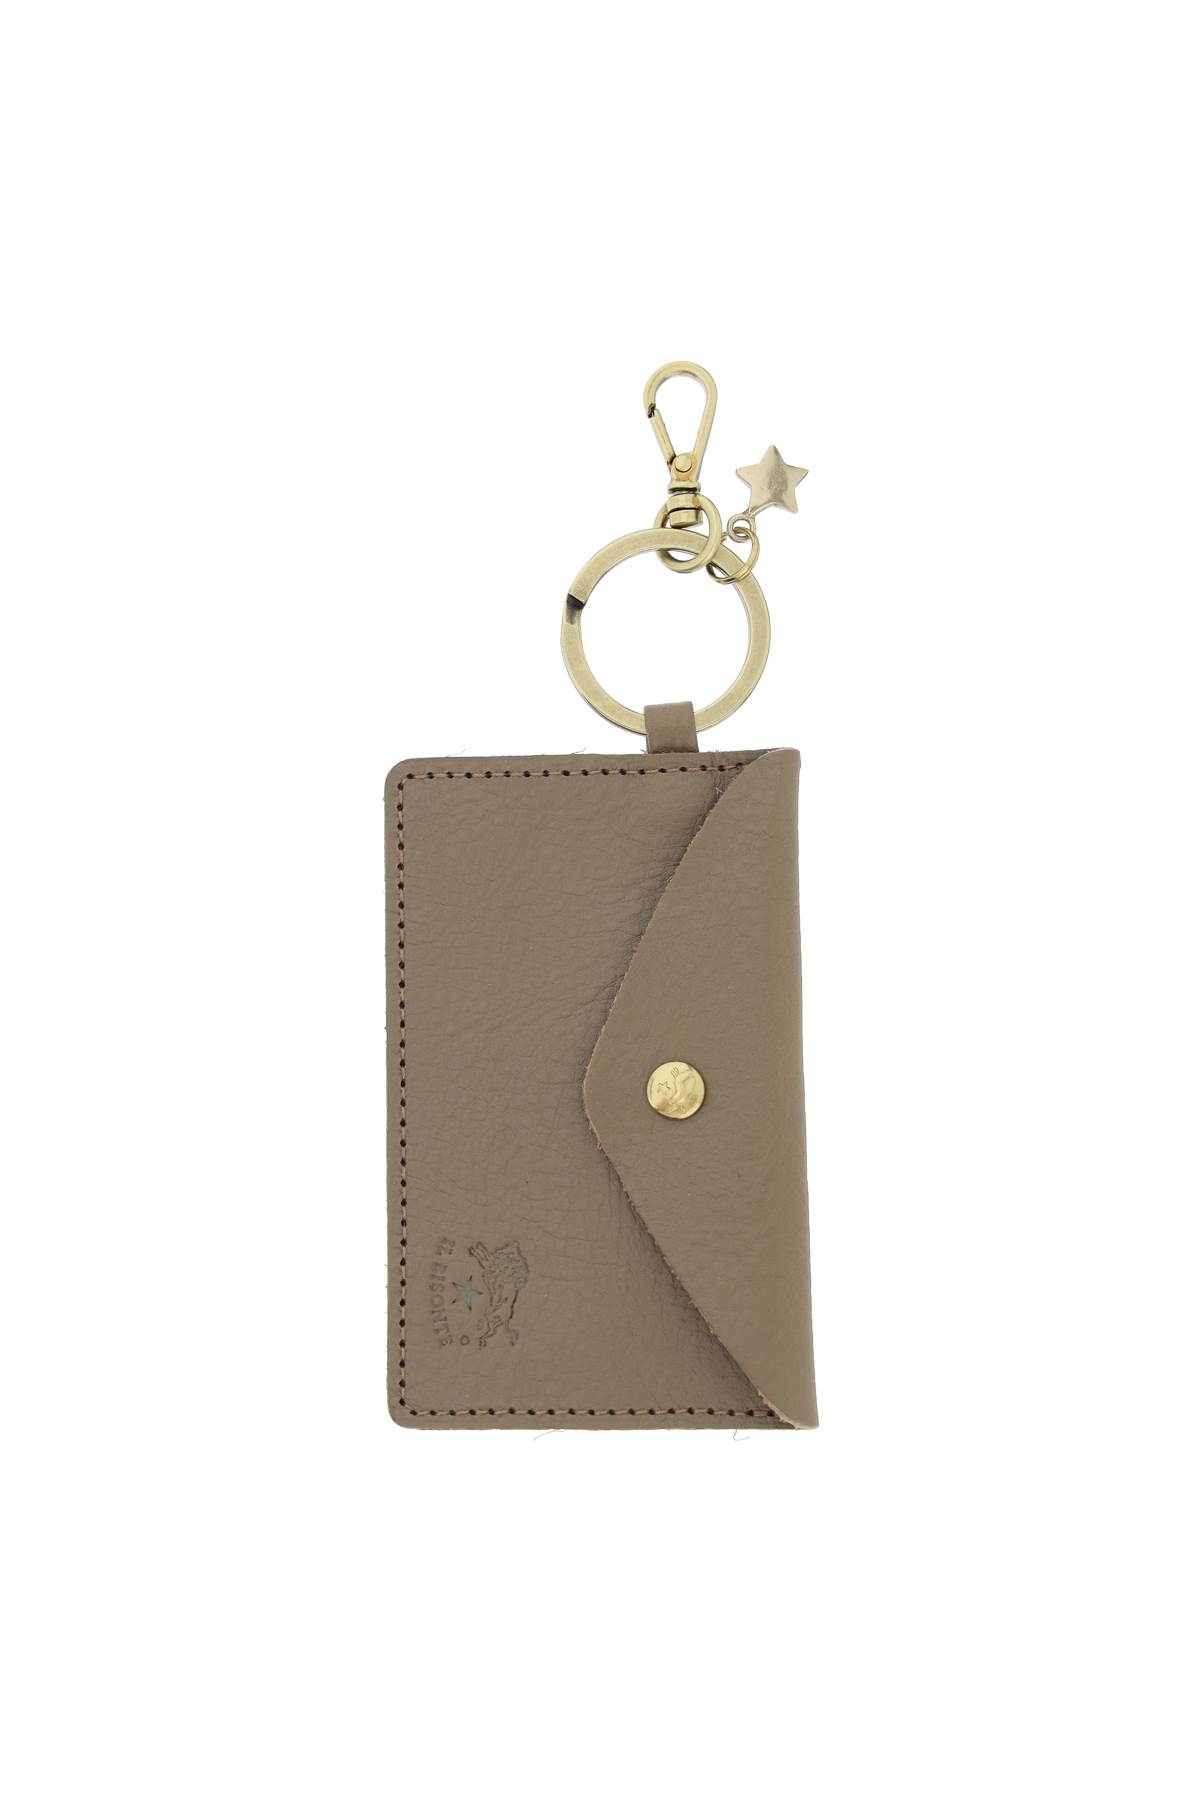 Il Bisonte Key Ring With Cardholder